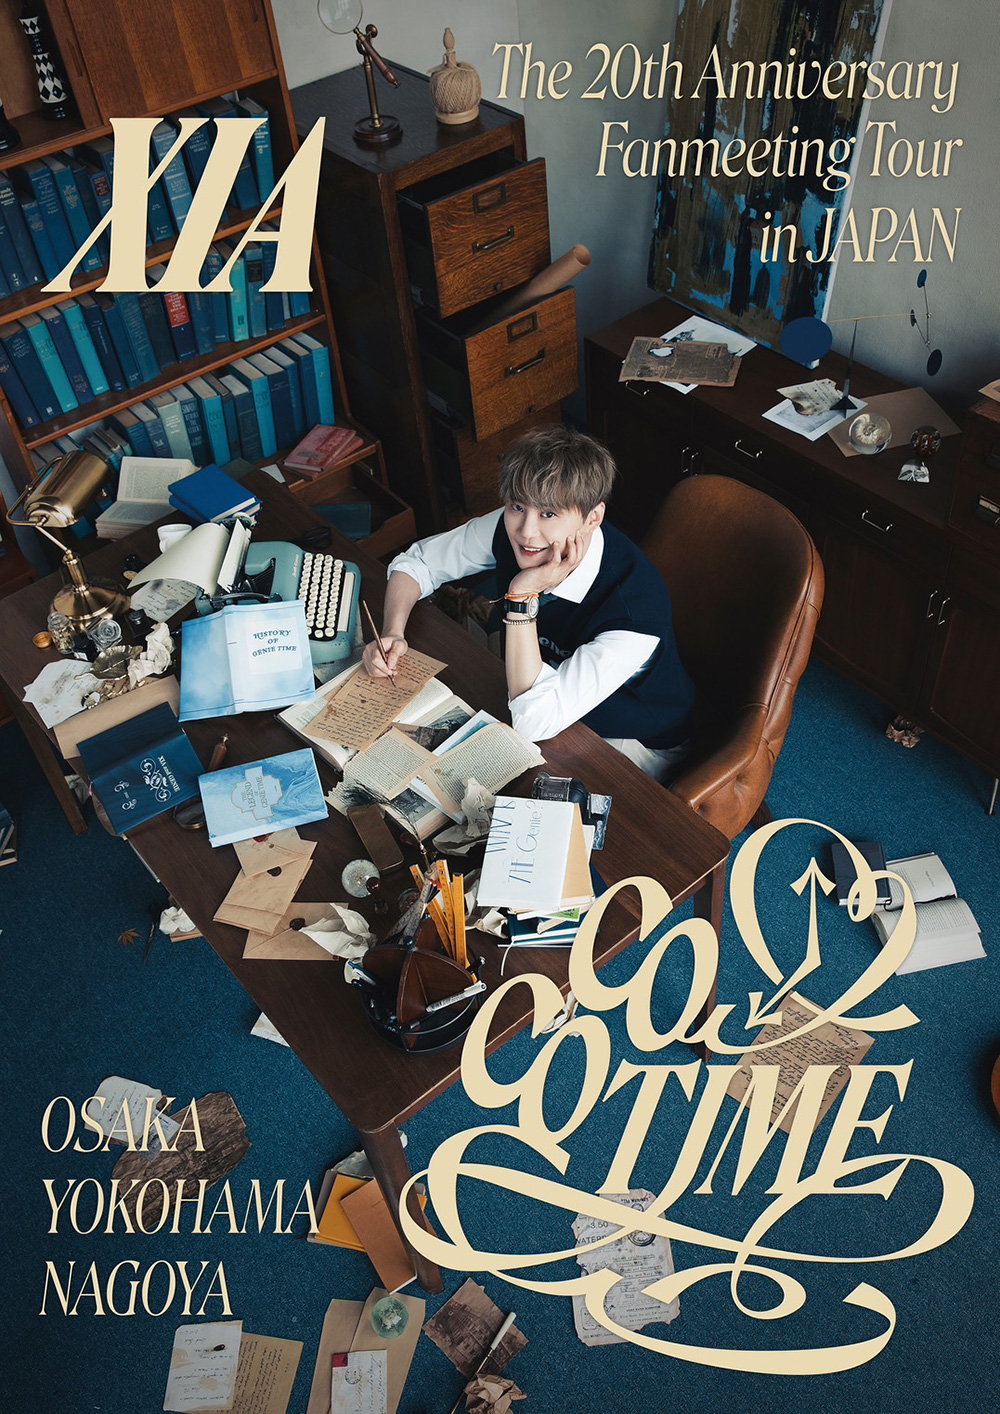 XIA Fanmeeting Tour ＜COCOTIME＞:The 20th Anniversary